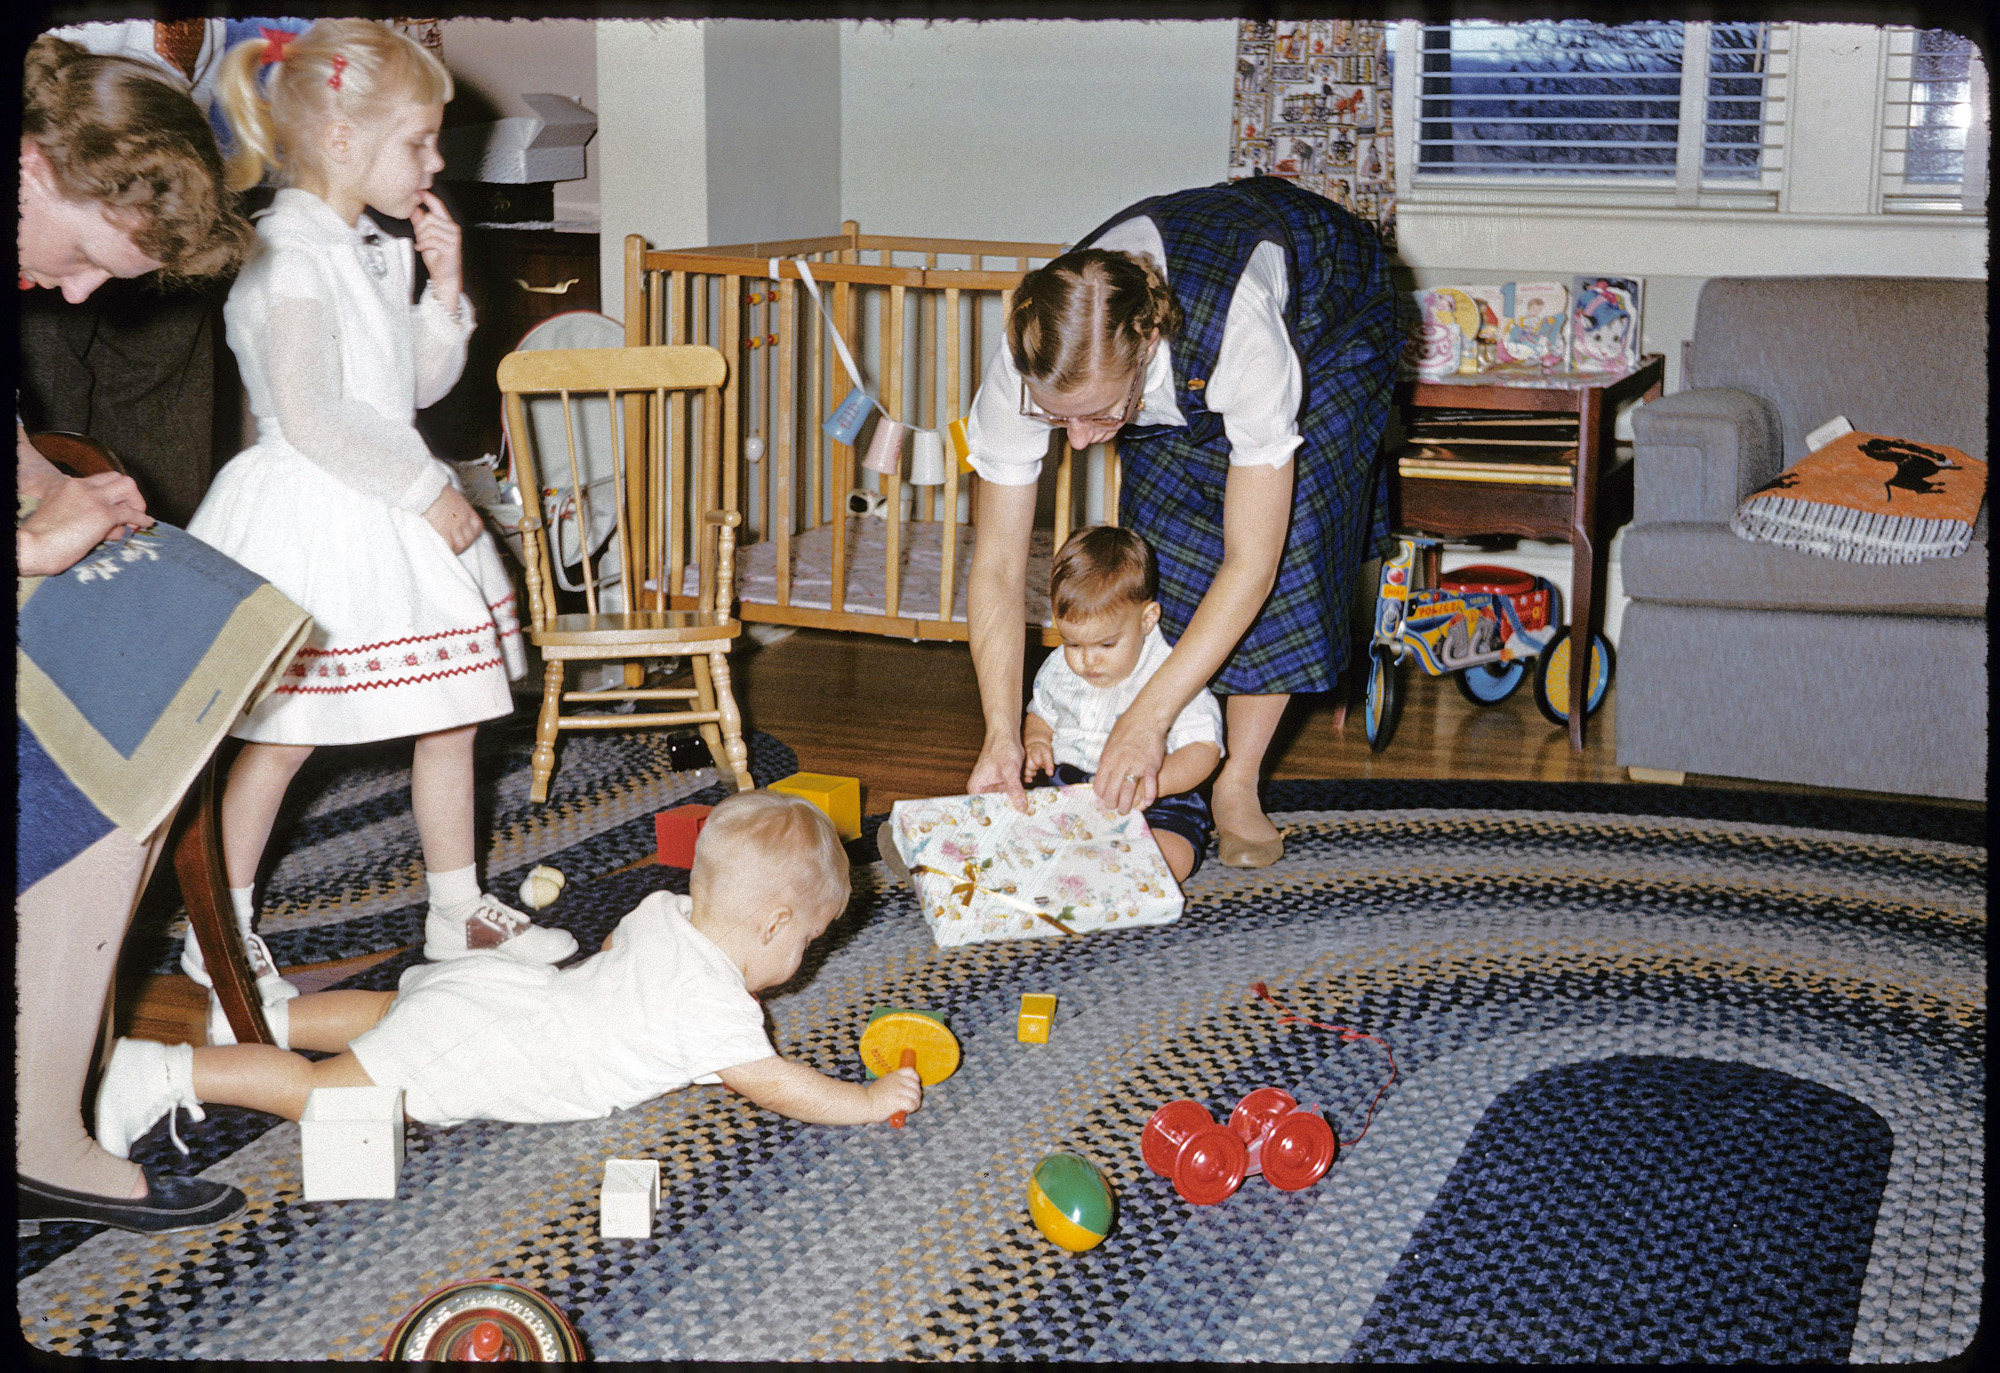 My brother's first birthday, 1957, East Aurora, NY. Cousins in attendance, myself in utero. Not the sharpest picture, but it fits well with another recent 1957 birthday picture posted here. The braided rugs, the toys, the clothes, my aunt's needlepoint project--all of possible interest. Taken, I believe, with my father's Minolta A Rangefinder. View full size.